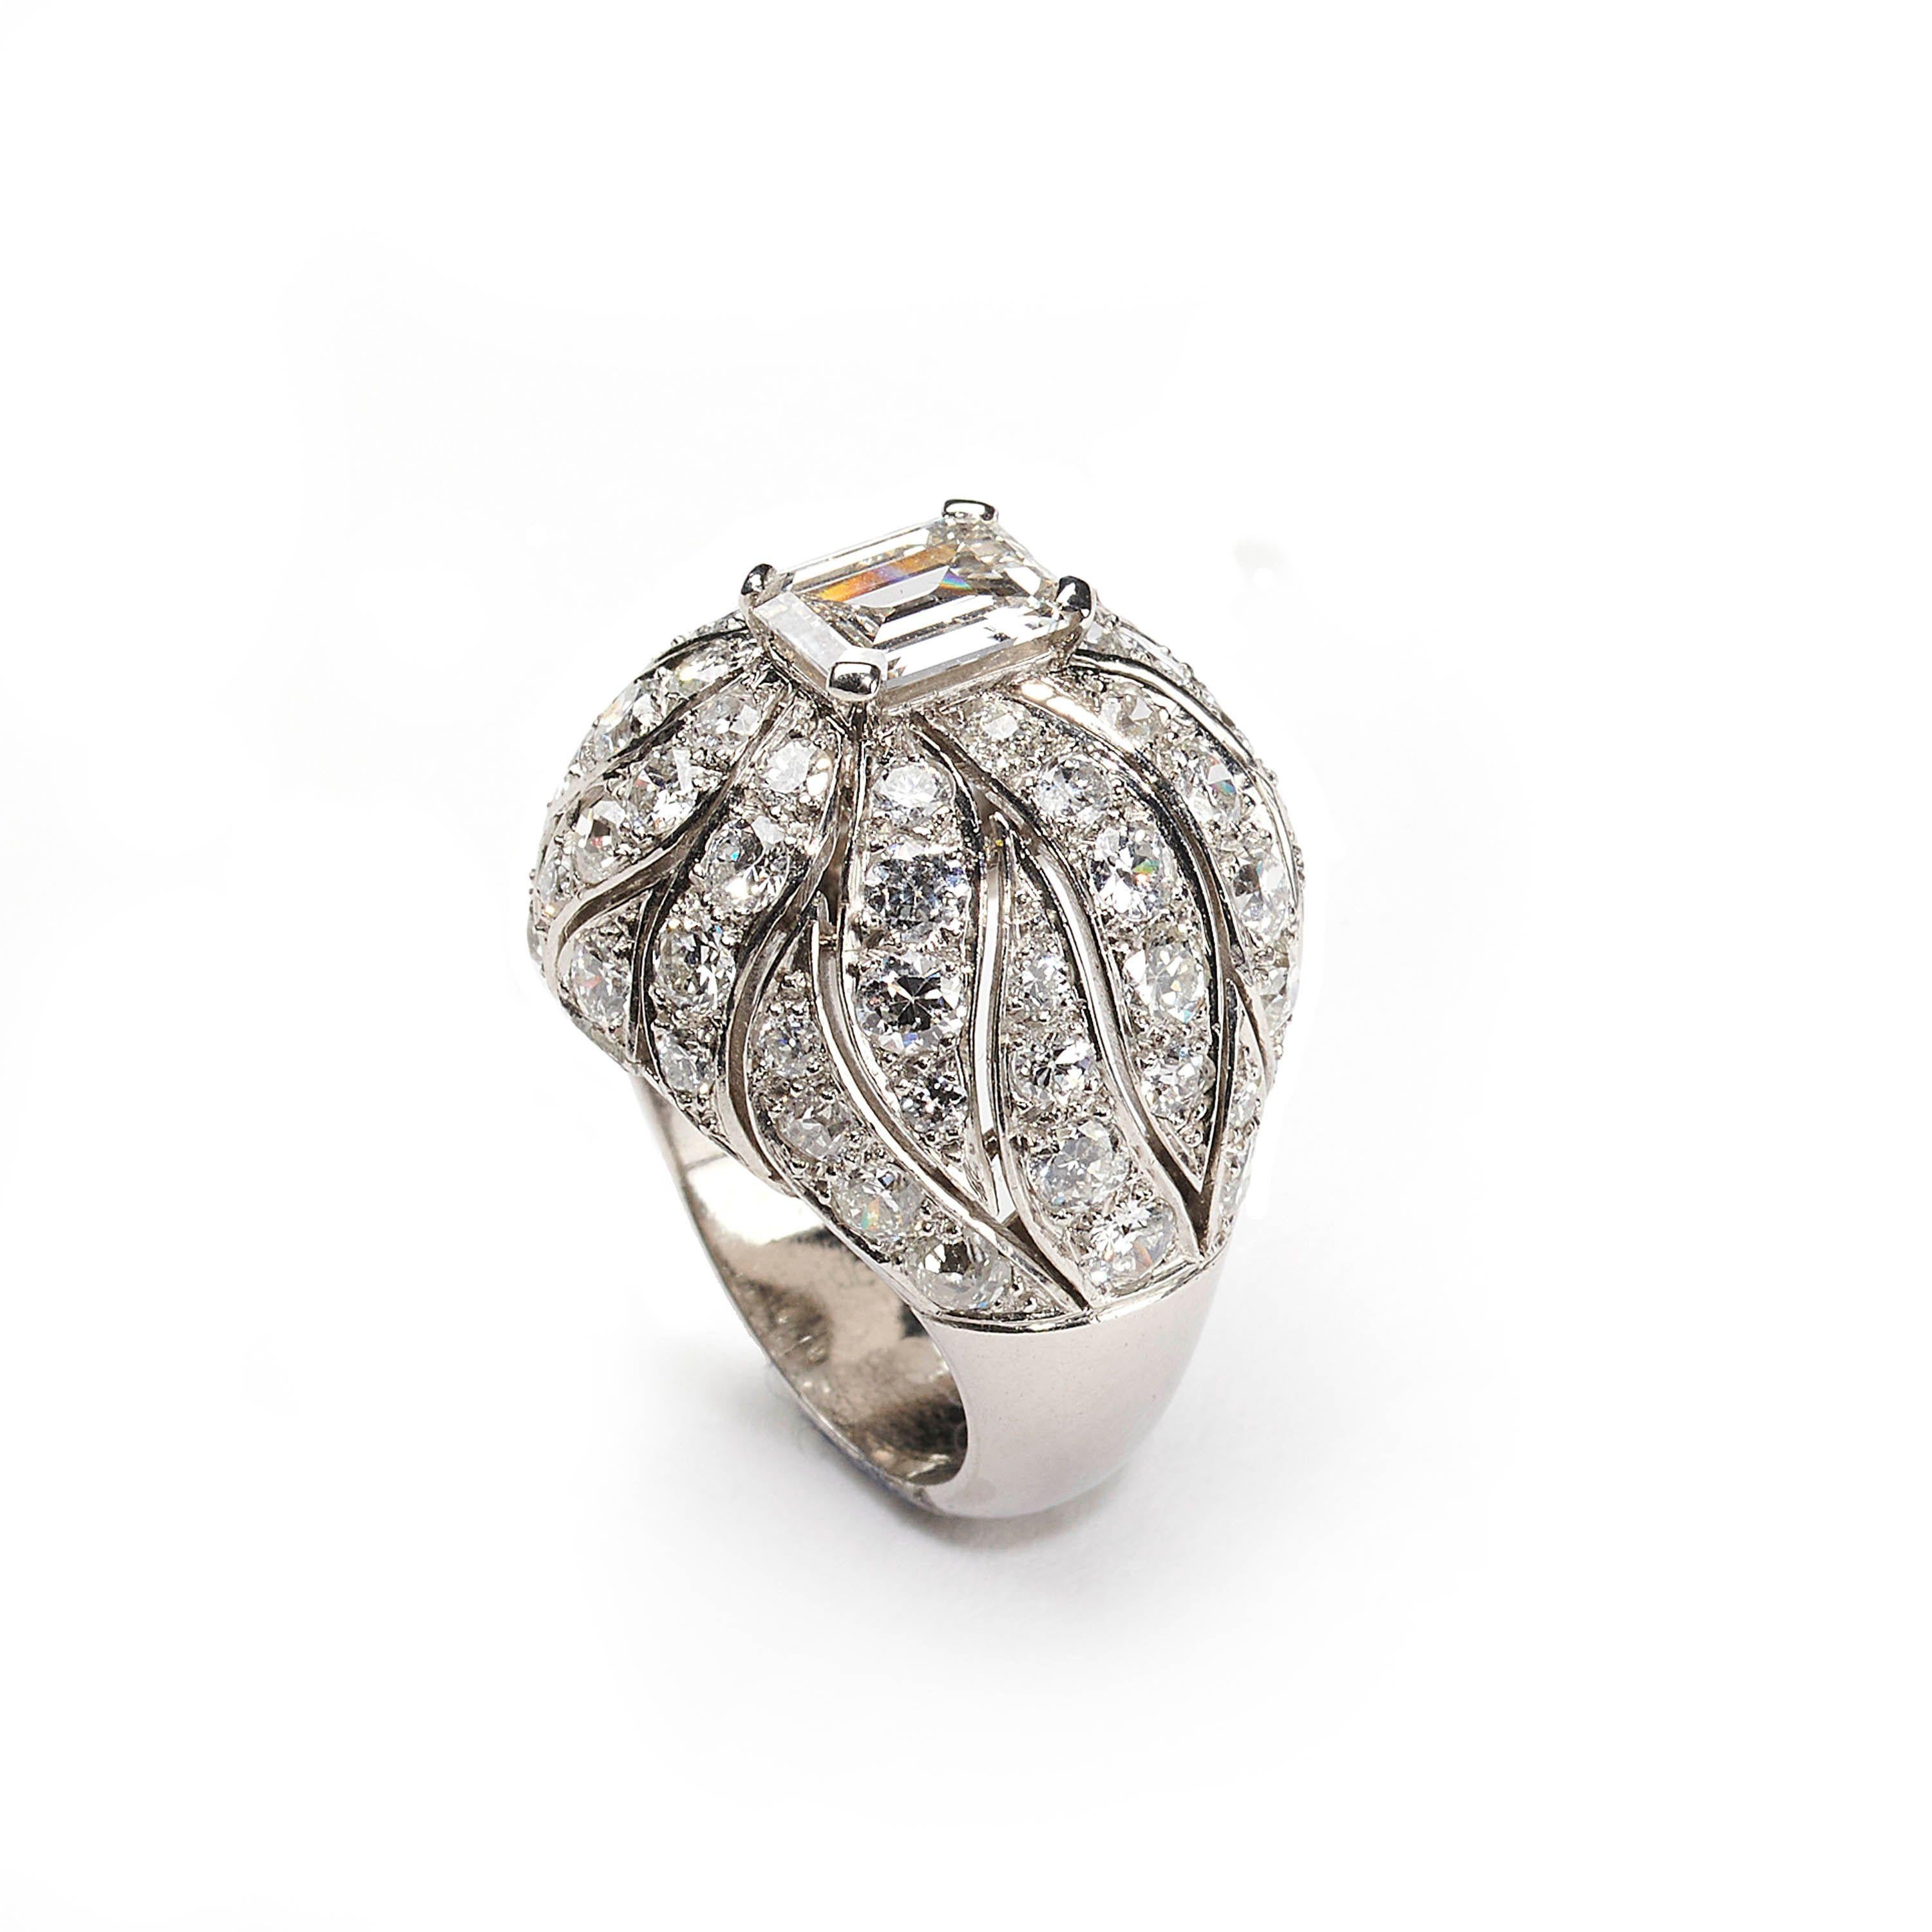 A Verger & Cie vintage bombé diamond ring, with a 1.24ct, J colour, SI2 clarity emerald-cut diamond, in a four claw setting, in the centre of an openwork, round brilliant-cut diamond set, flame like design, on bombé shoulders, on a solid, D shaped,